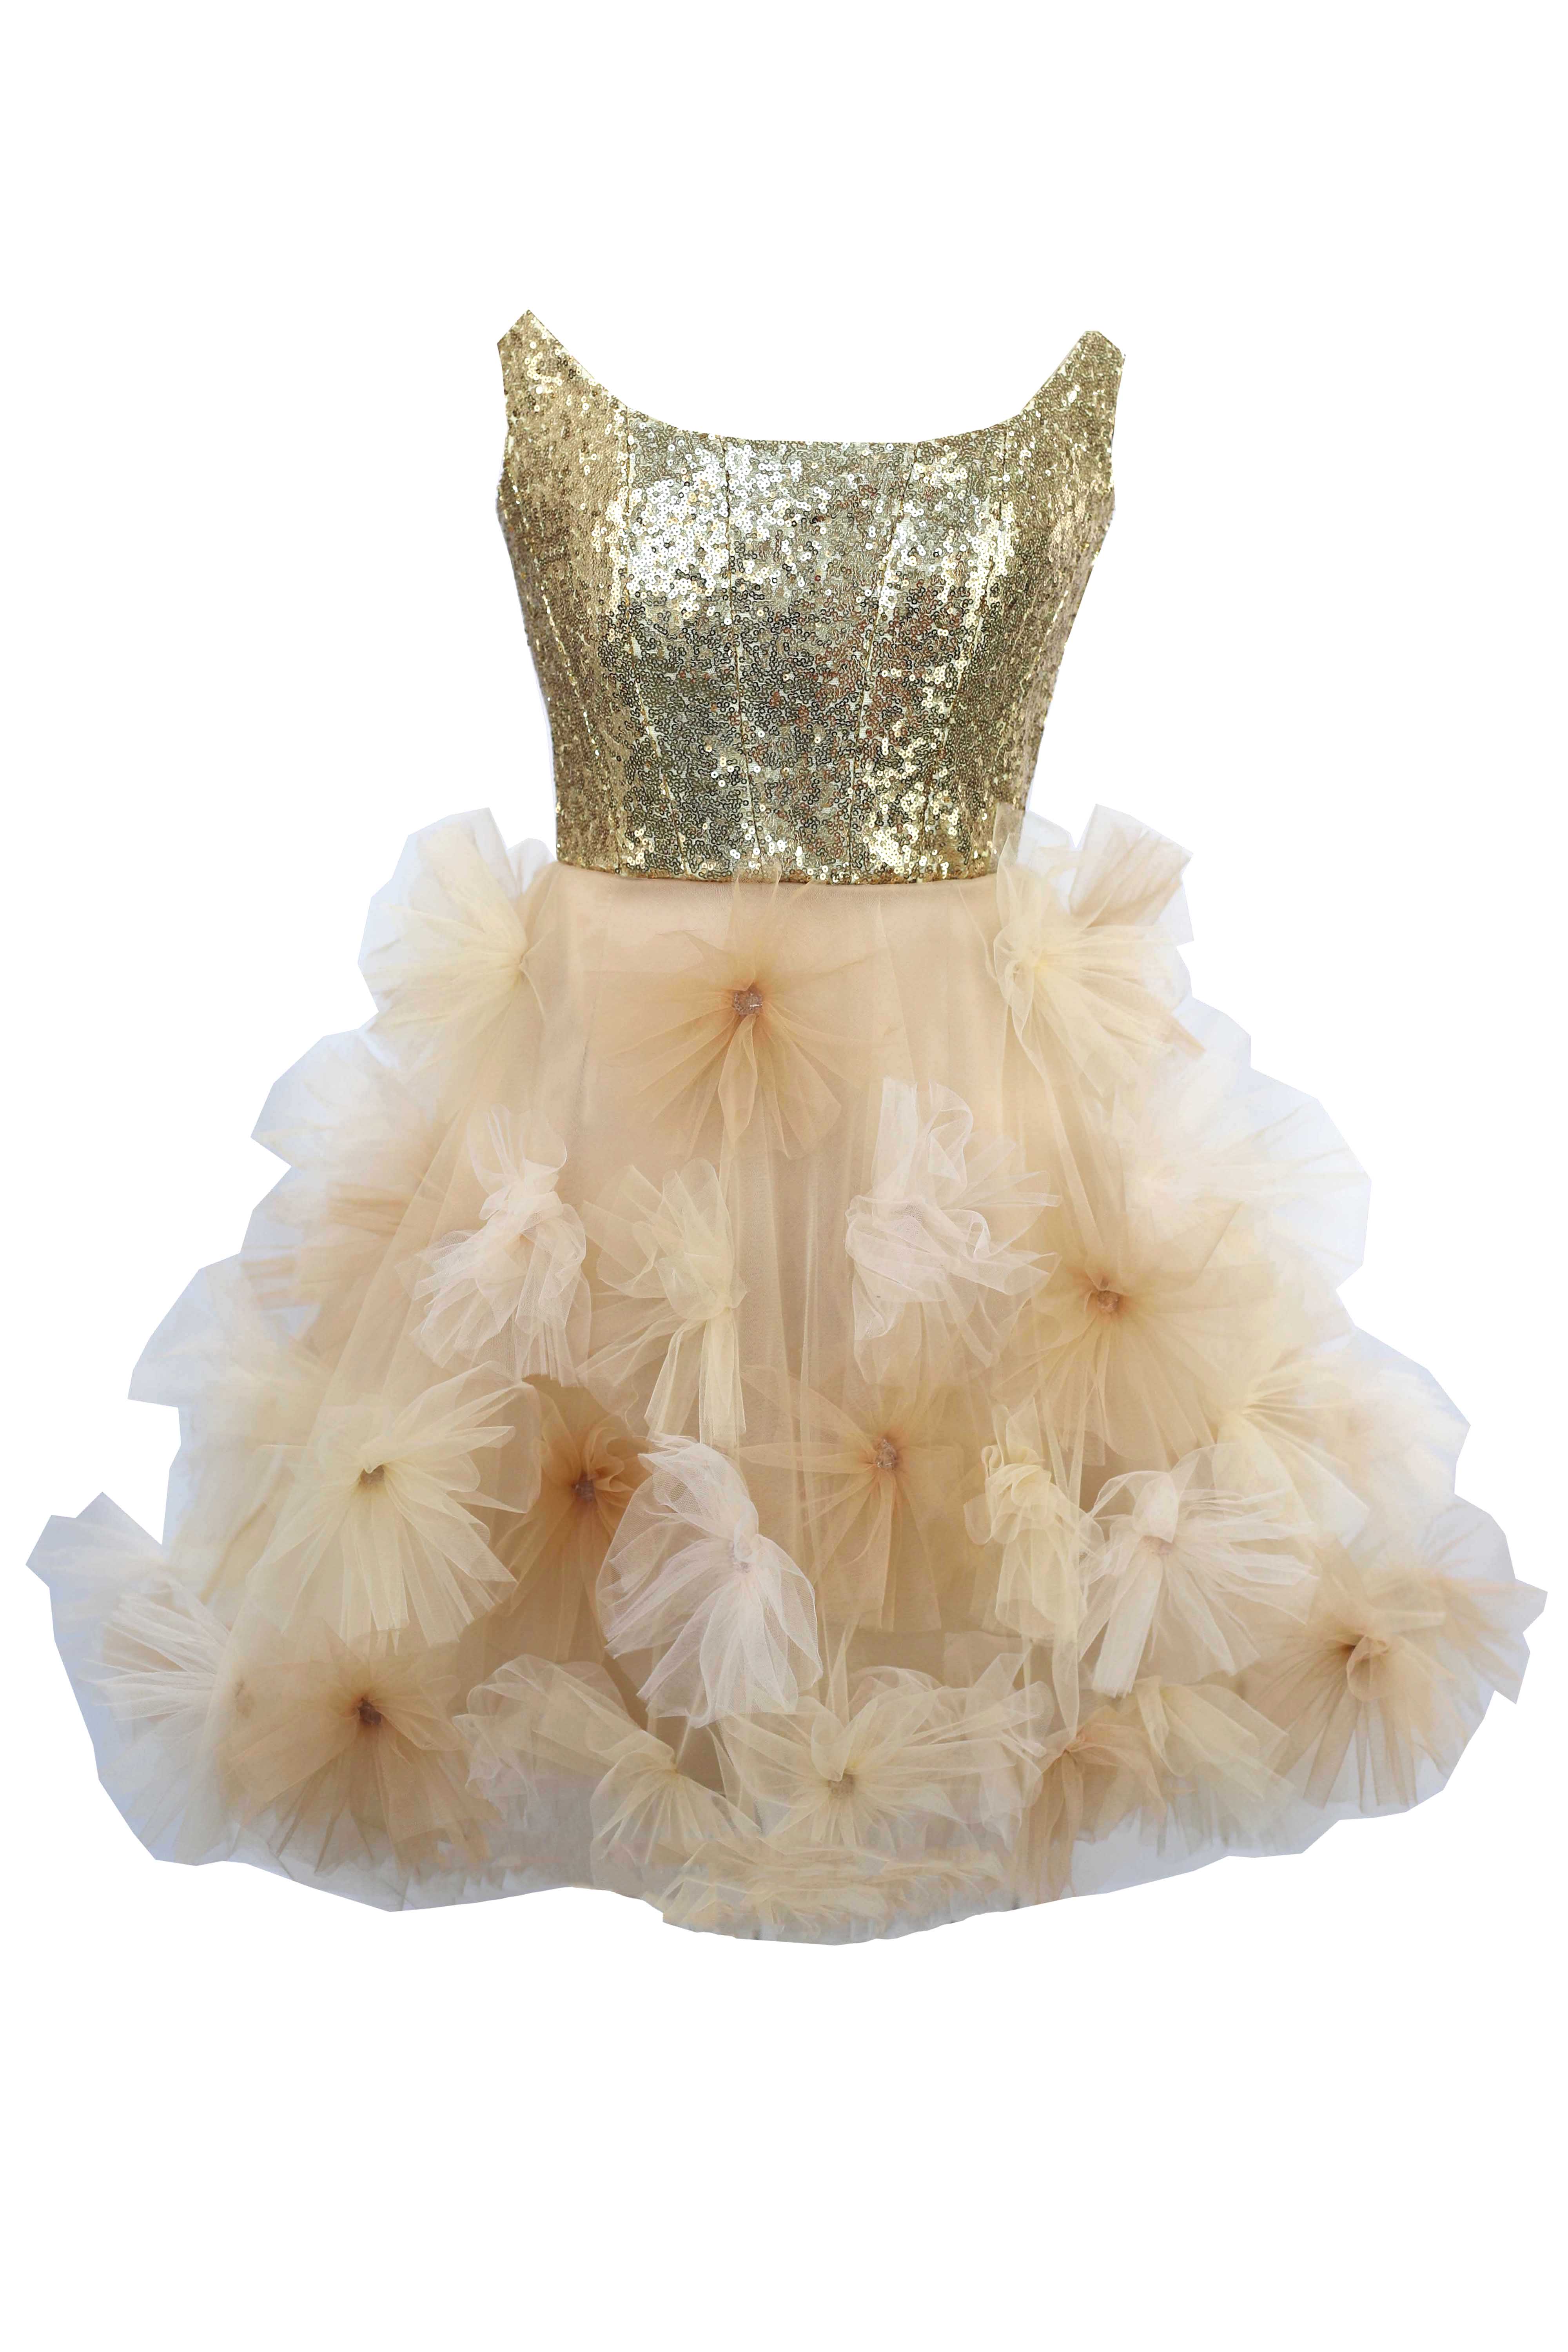 R24170 - GOLD 01 - TIMEEA gold sequins and nude tulle corset mini dress AMBAR STUDIO